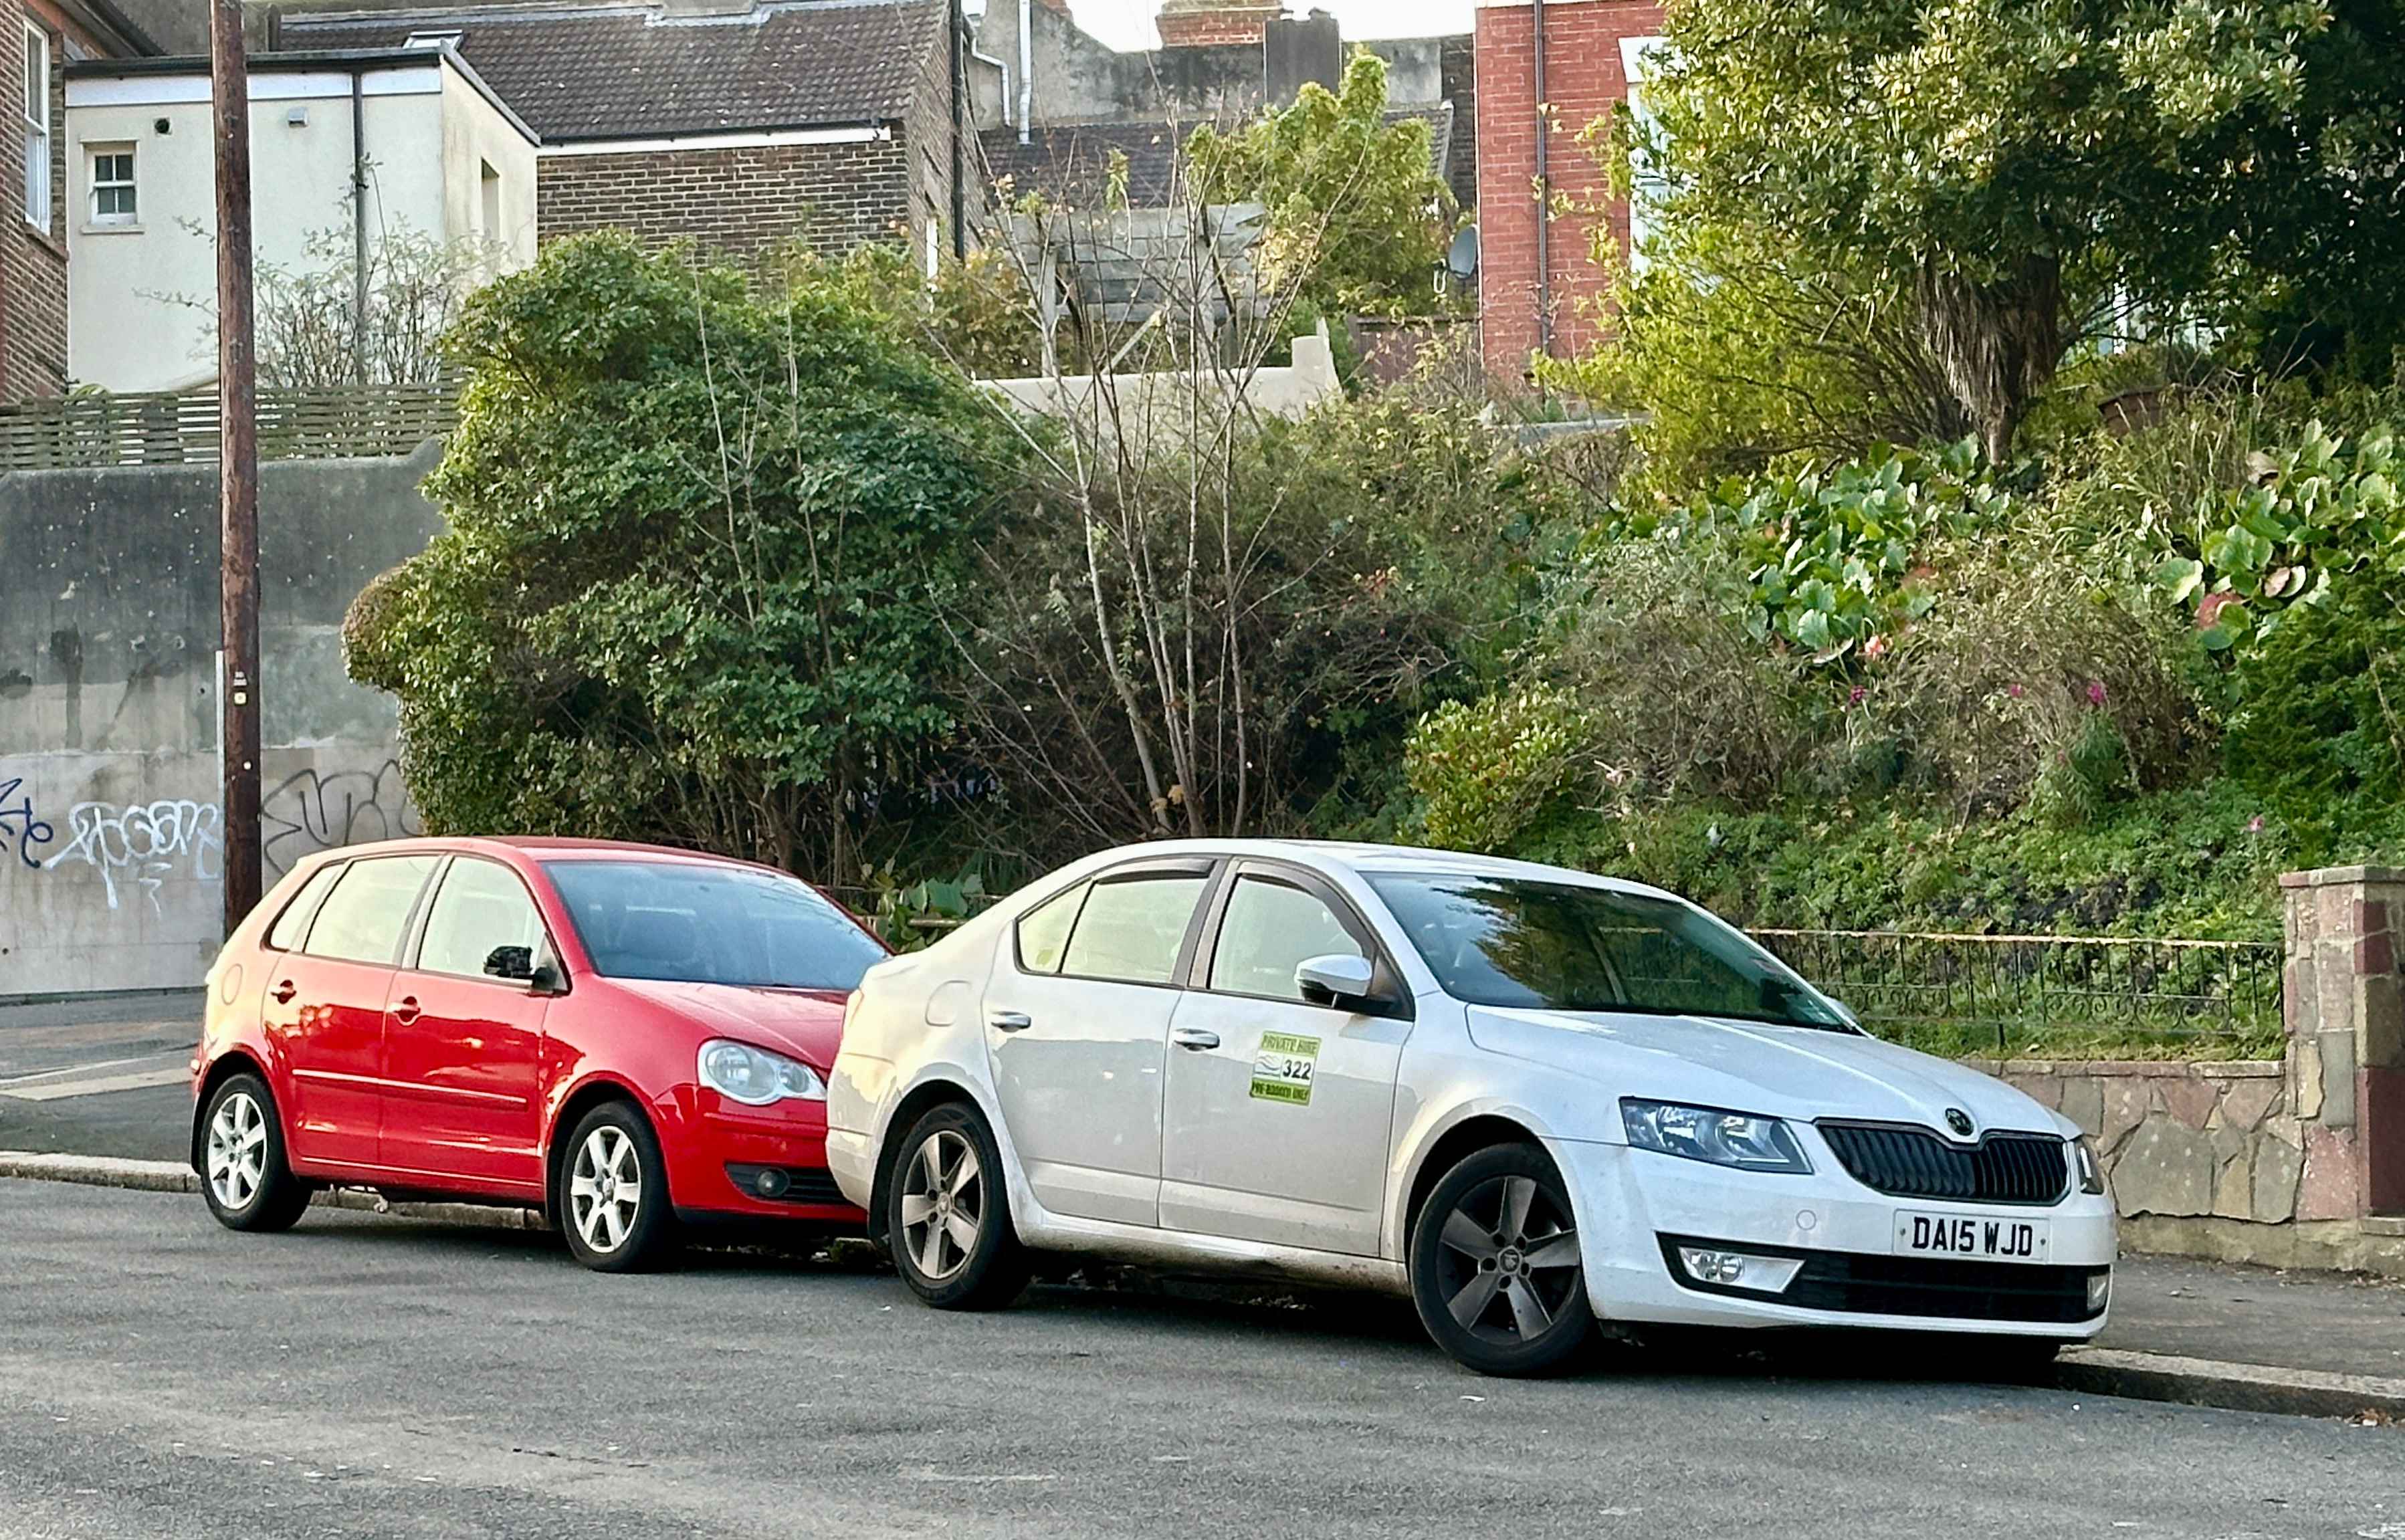 Photograph of DA15 WJD - a White Skoda Octavia taxi parked in Hollingdean by a non-resident. The fourth of five photographs supplied by the residents of Hollingdean.